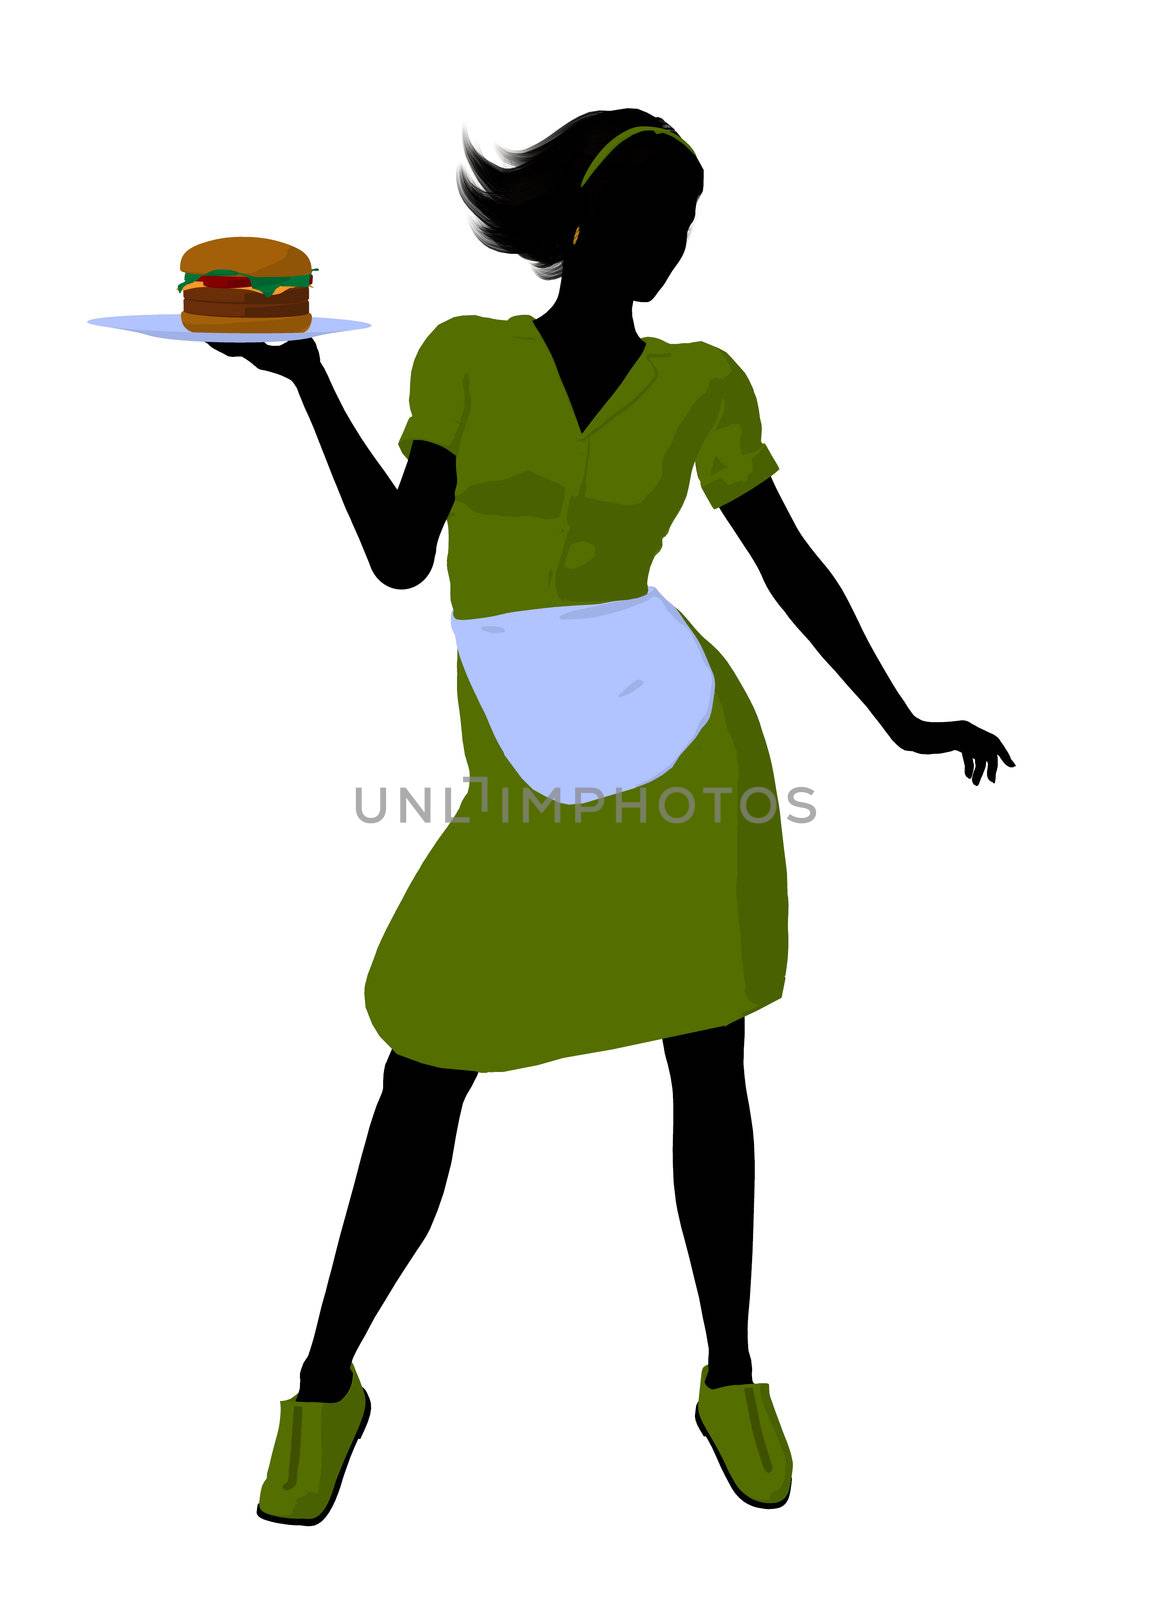 Female waitress silhouette on a white background